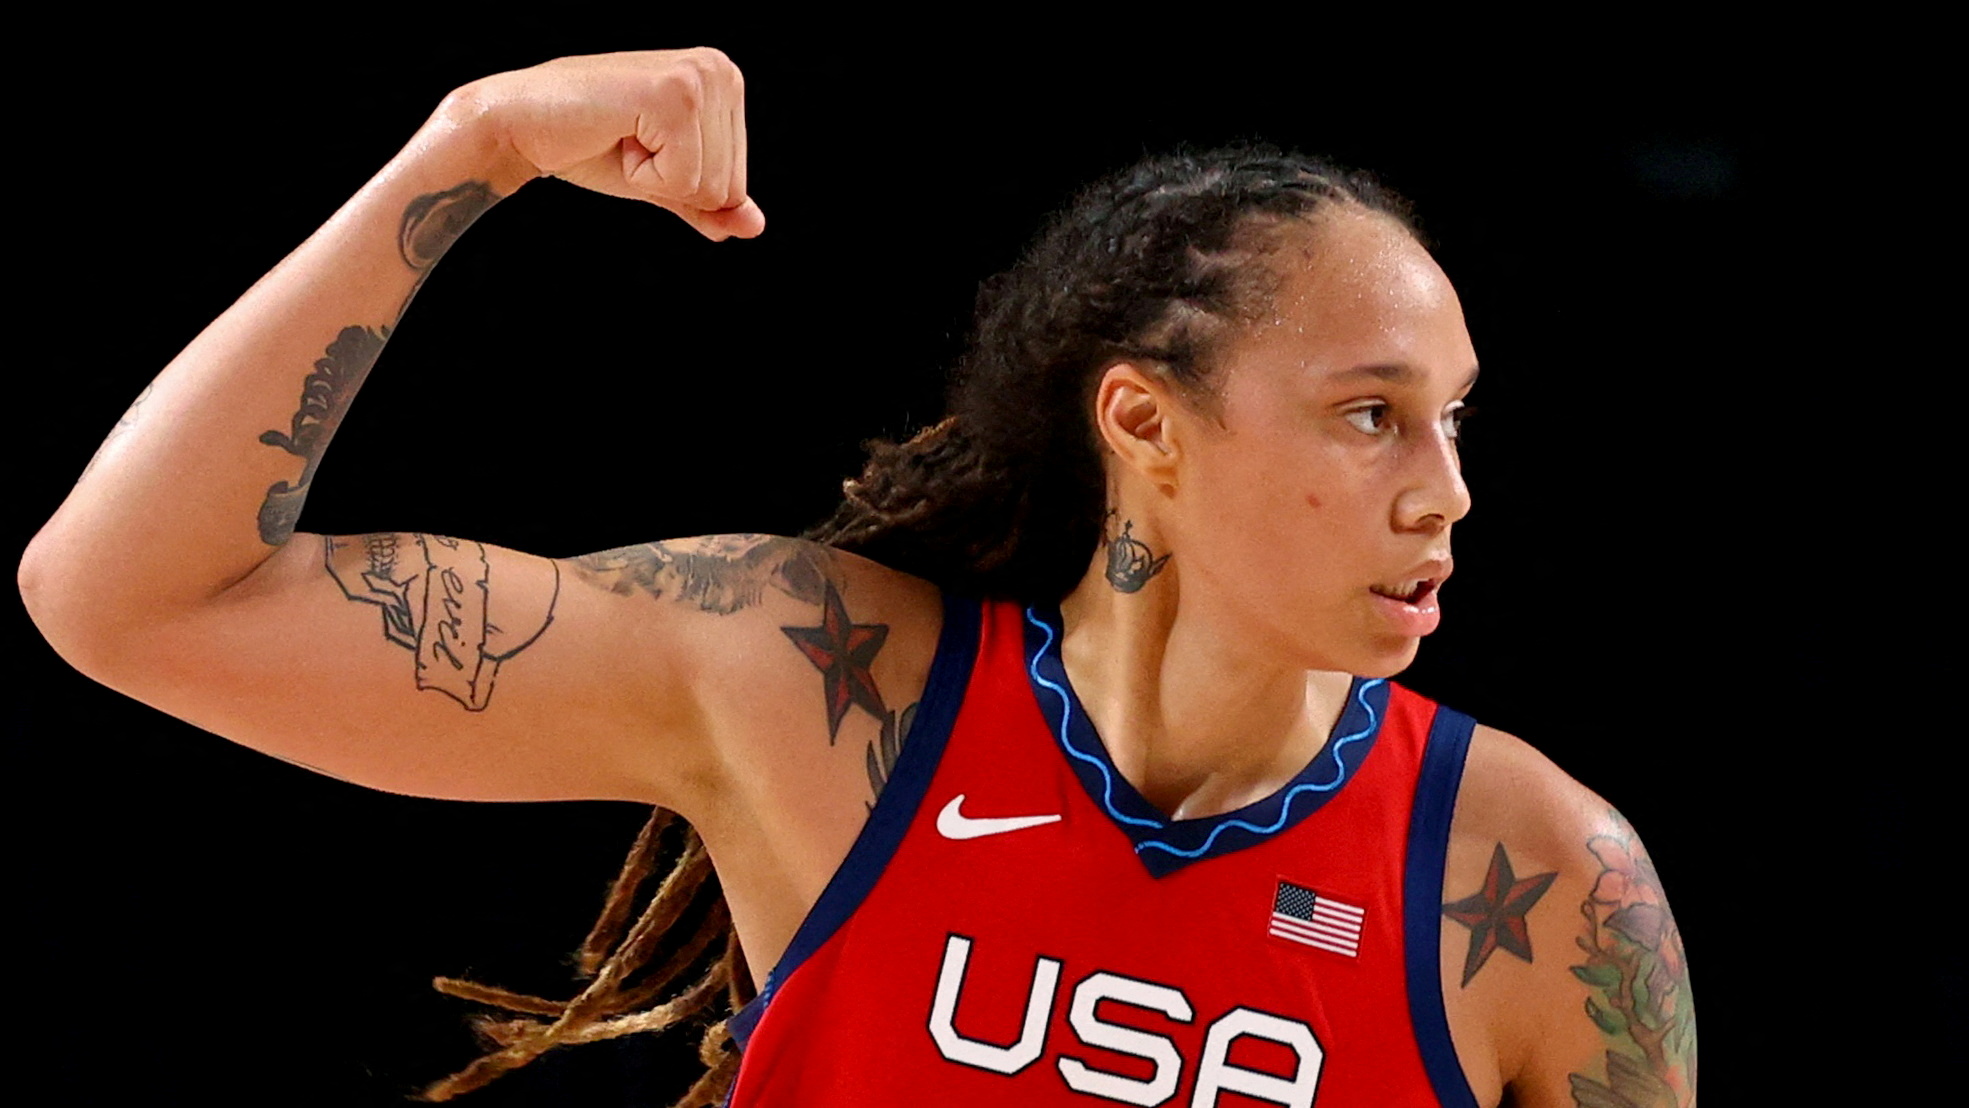 Brittney Griner S Wife Thanks Fans For Support After Arrest The Globe And Mail